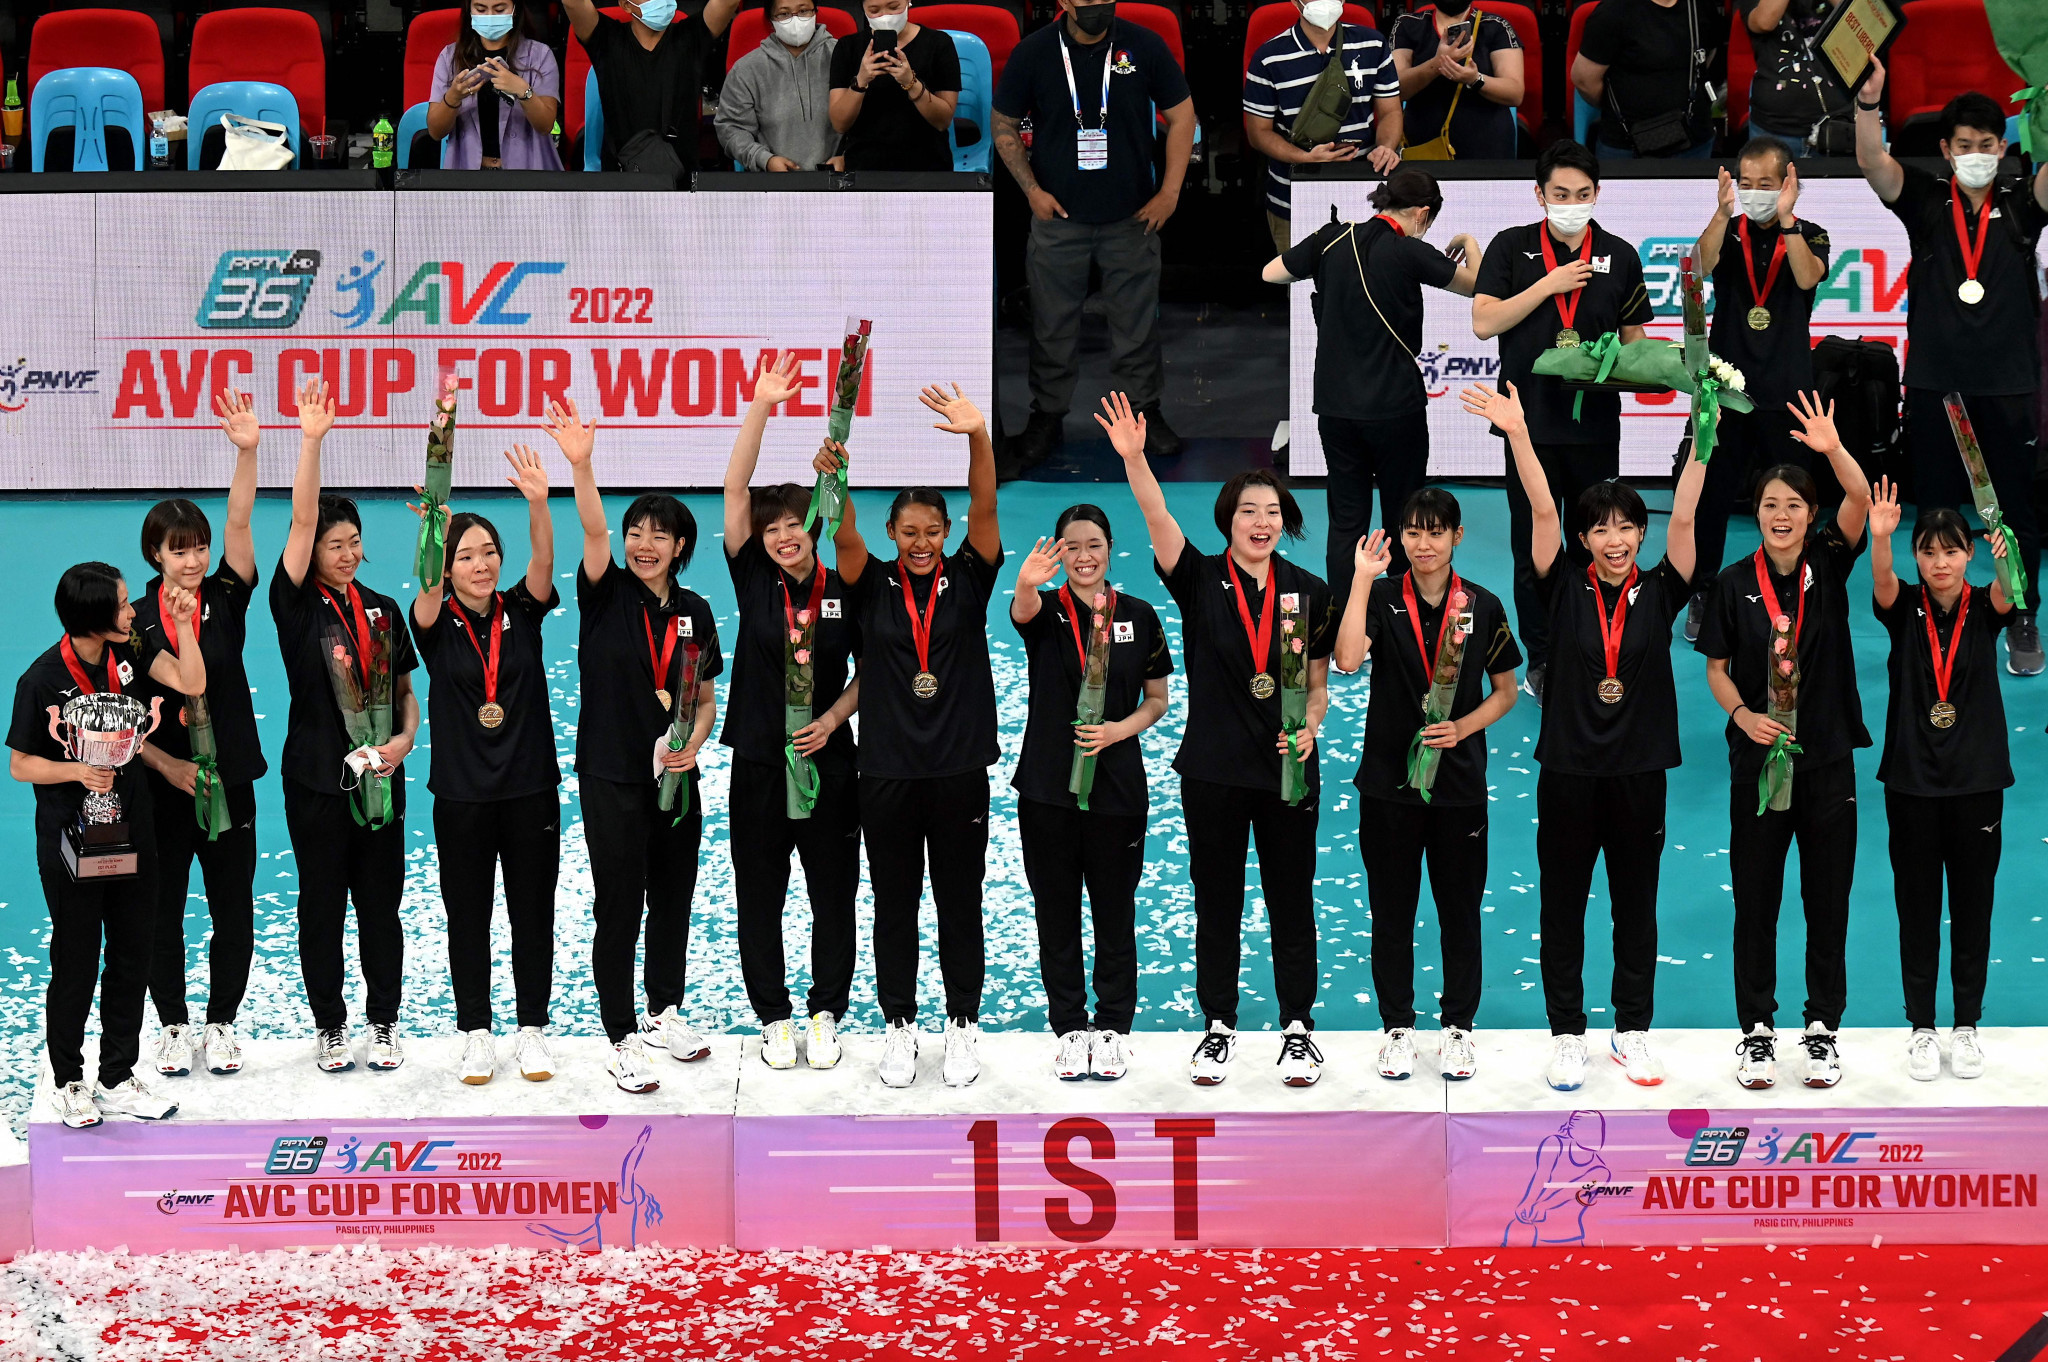 Japan's players celebrate on the podium after winning the Asian Women's Volleyball Cup ©Getty Images